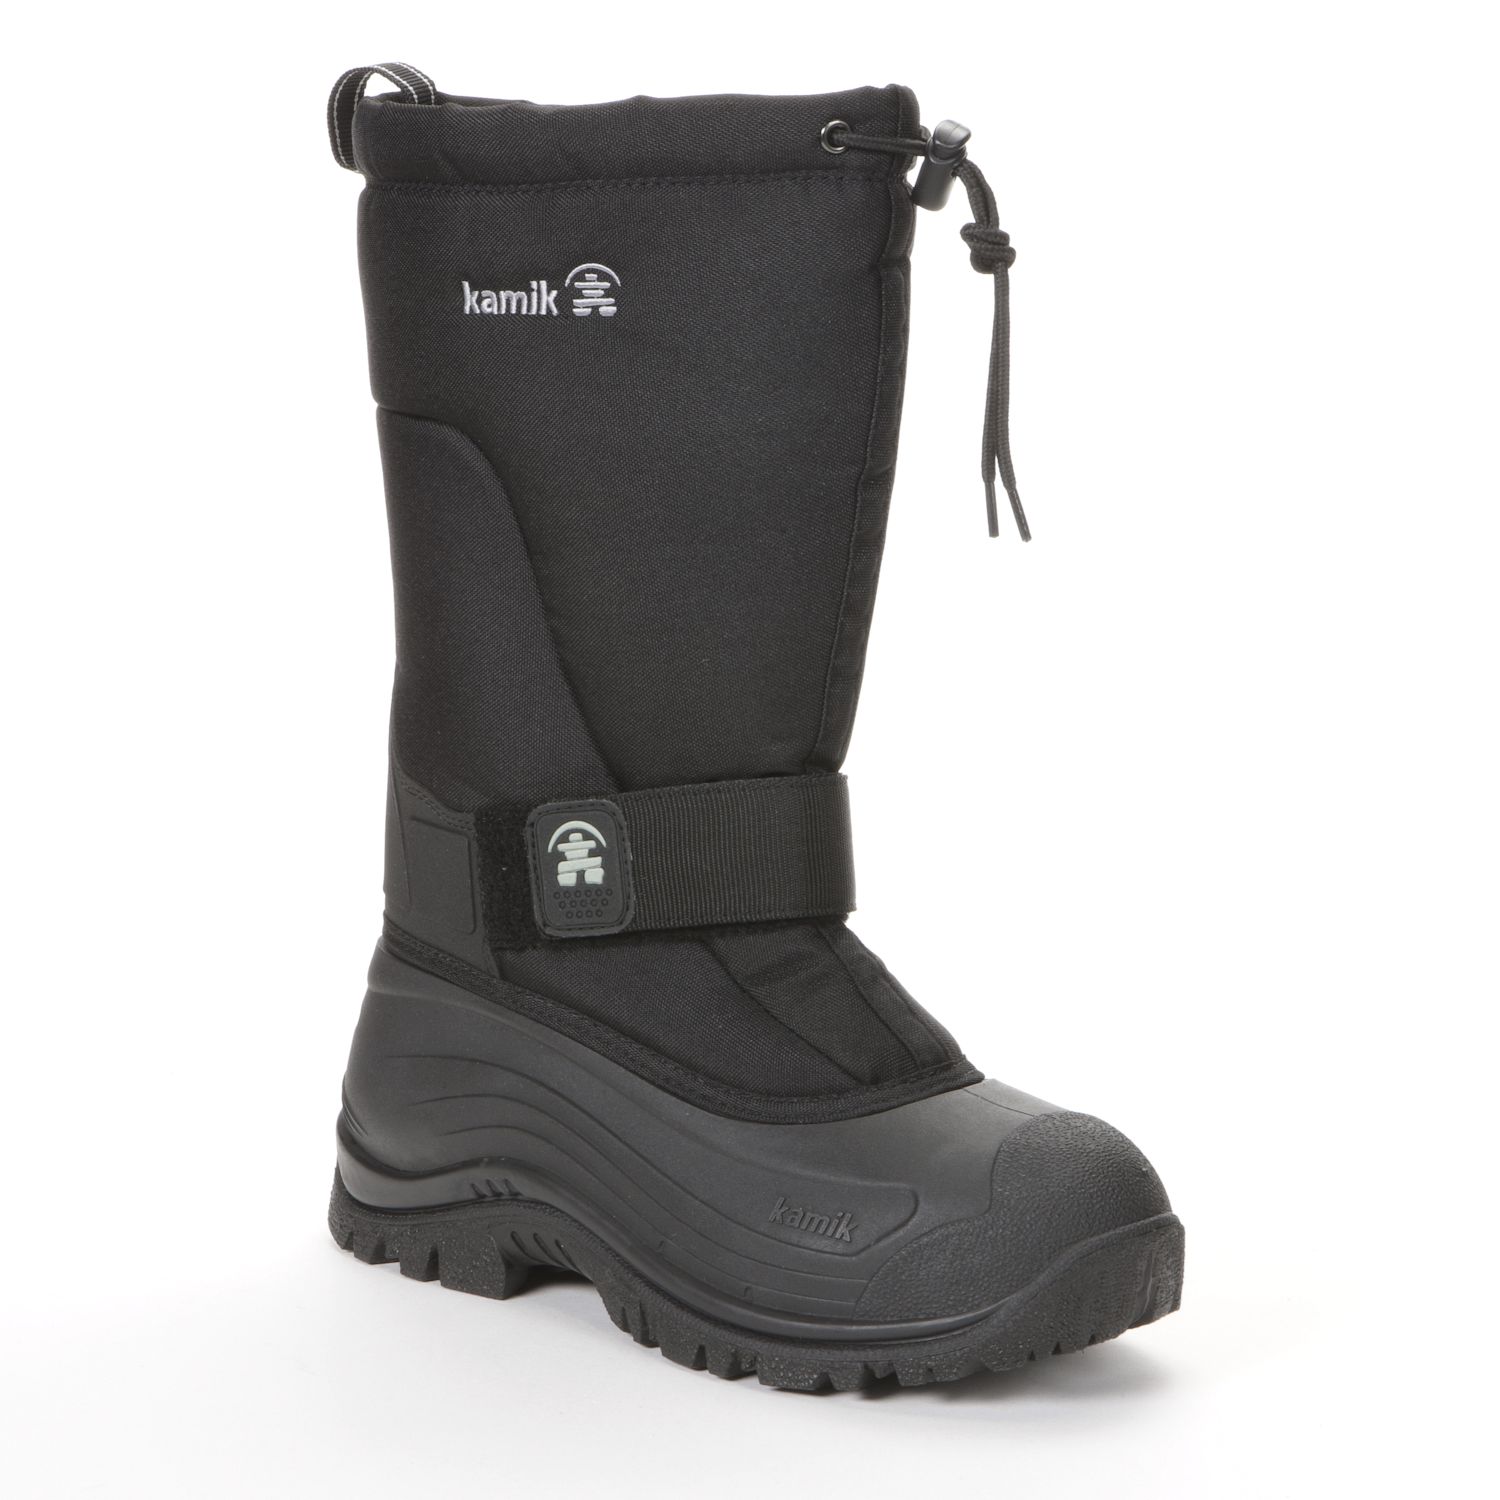 kohl's clearance winter boots